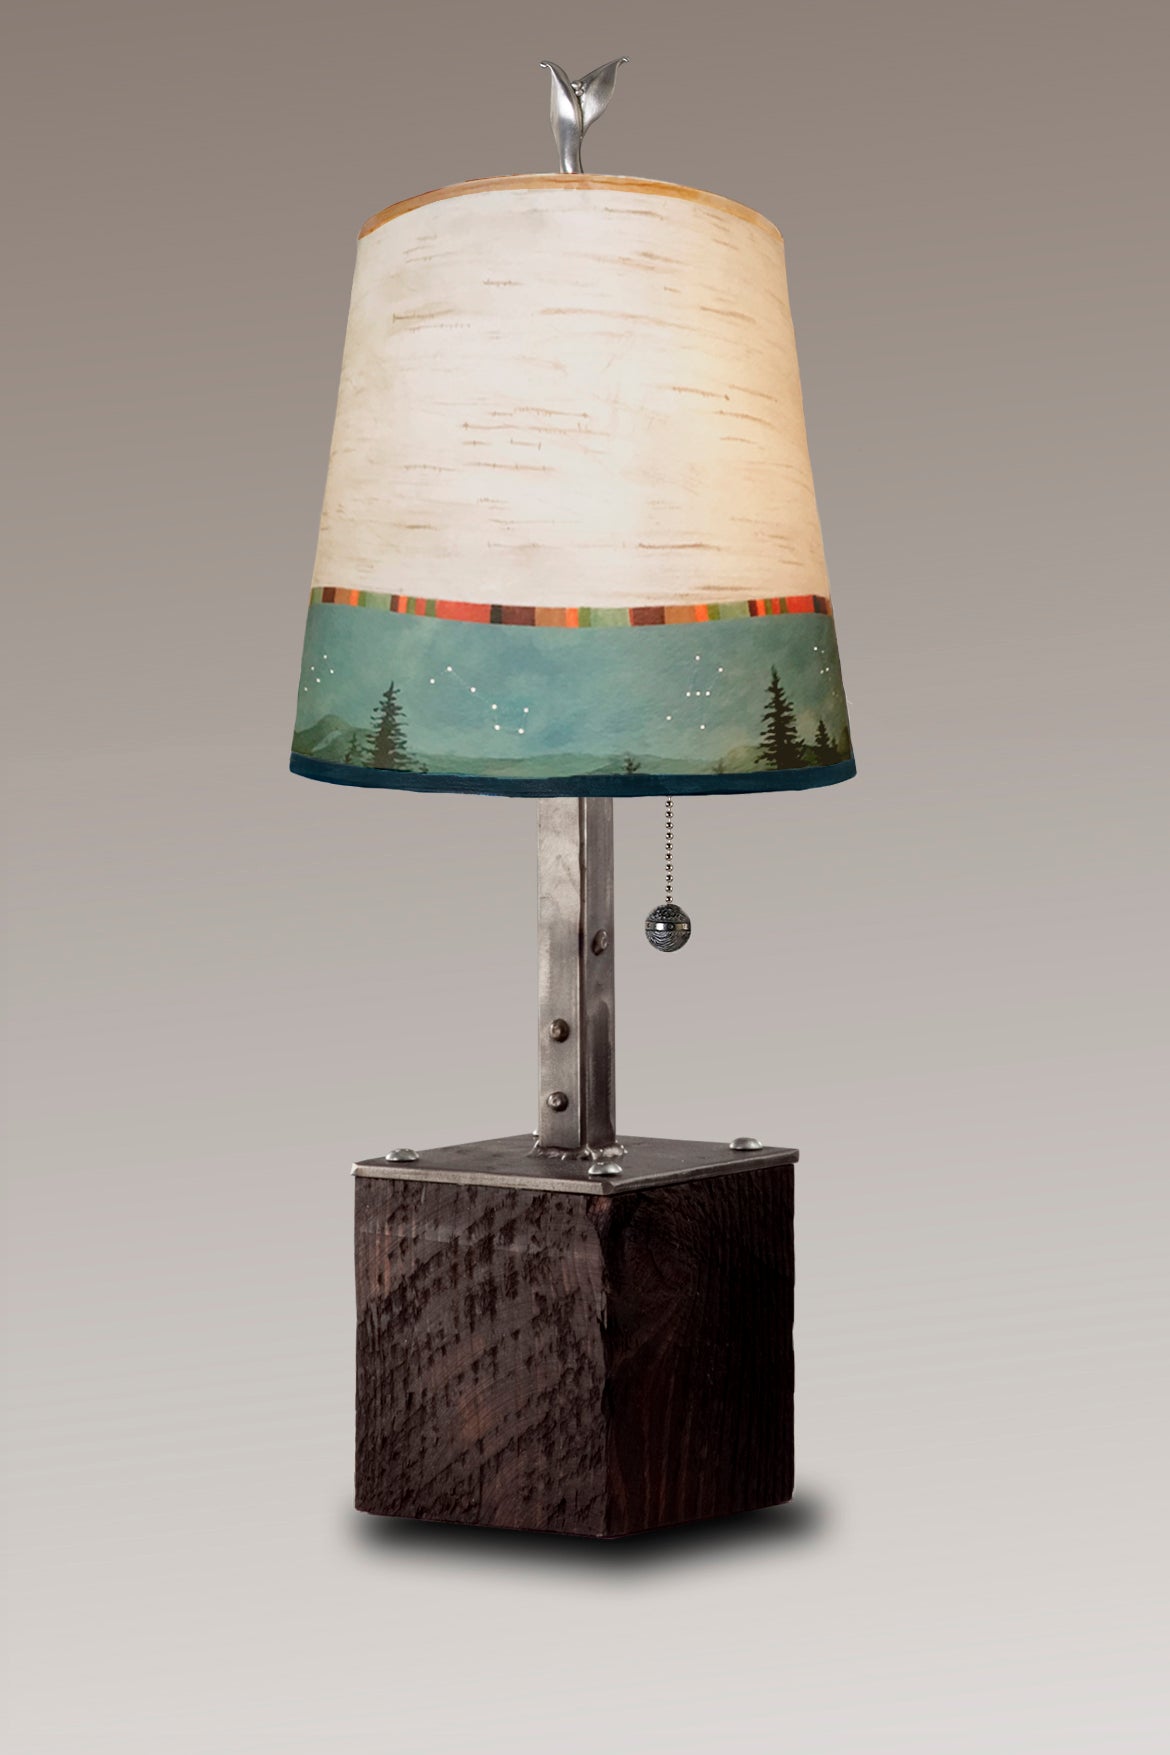 Janna Ugone &amp; Co Table Lamps Steel Table Lamp on Reclaimed Wood with Small Drum Shade in Birch Midnight